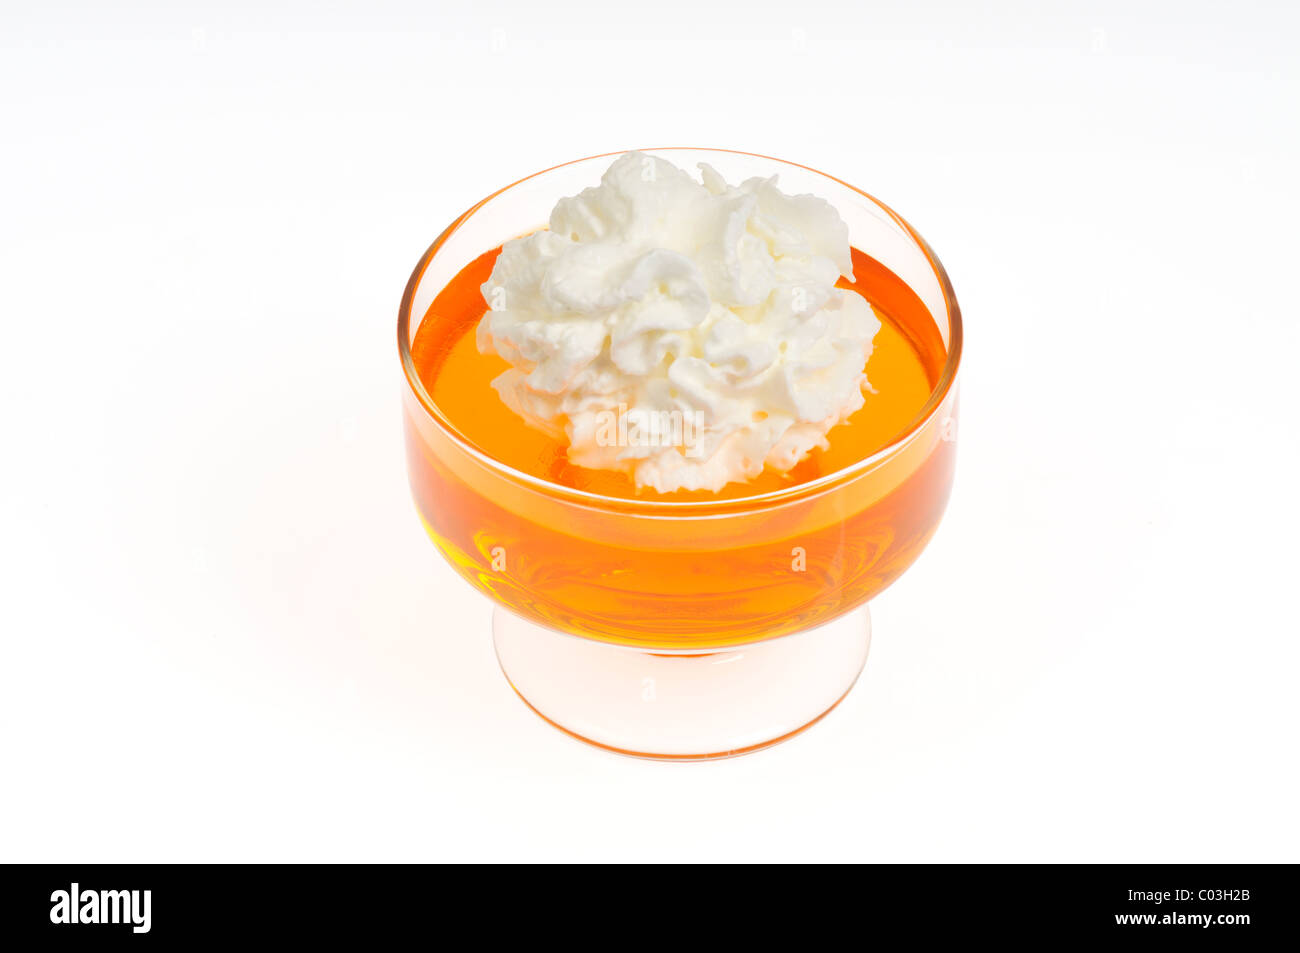 Orange Jell-O with whipped cream topping in glass serving dish on white background, cutout Stock Photo